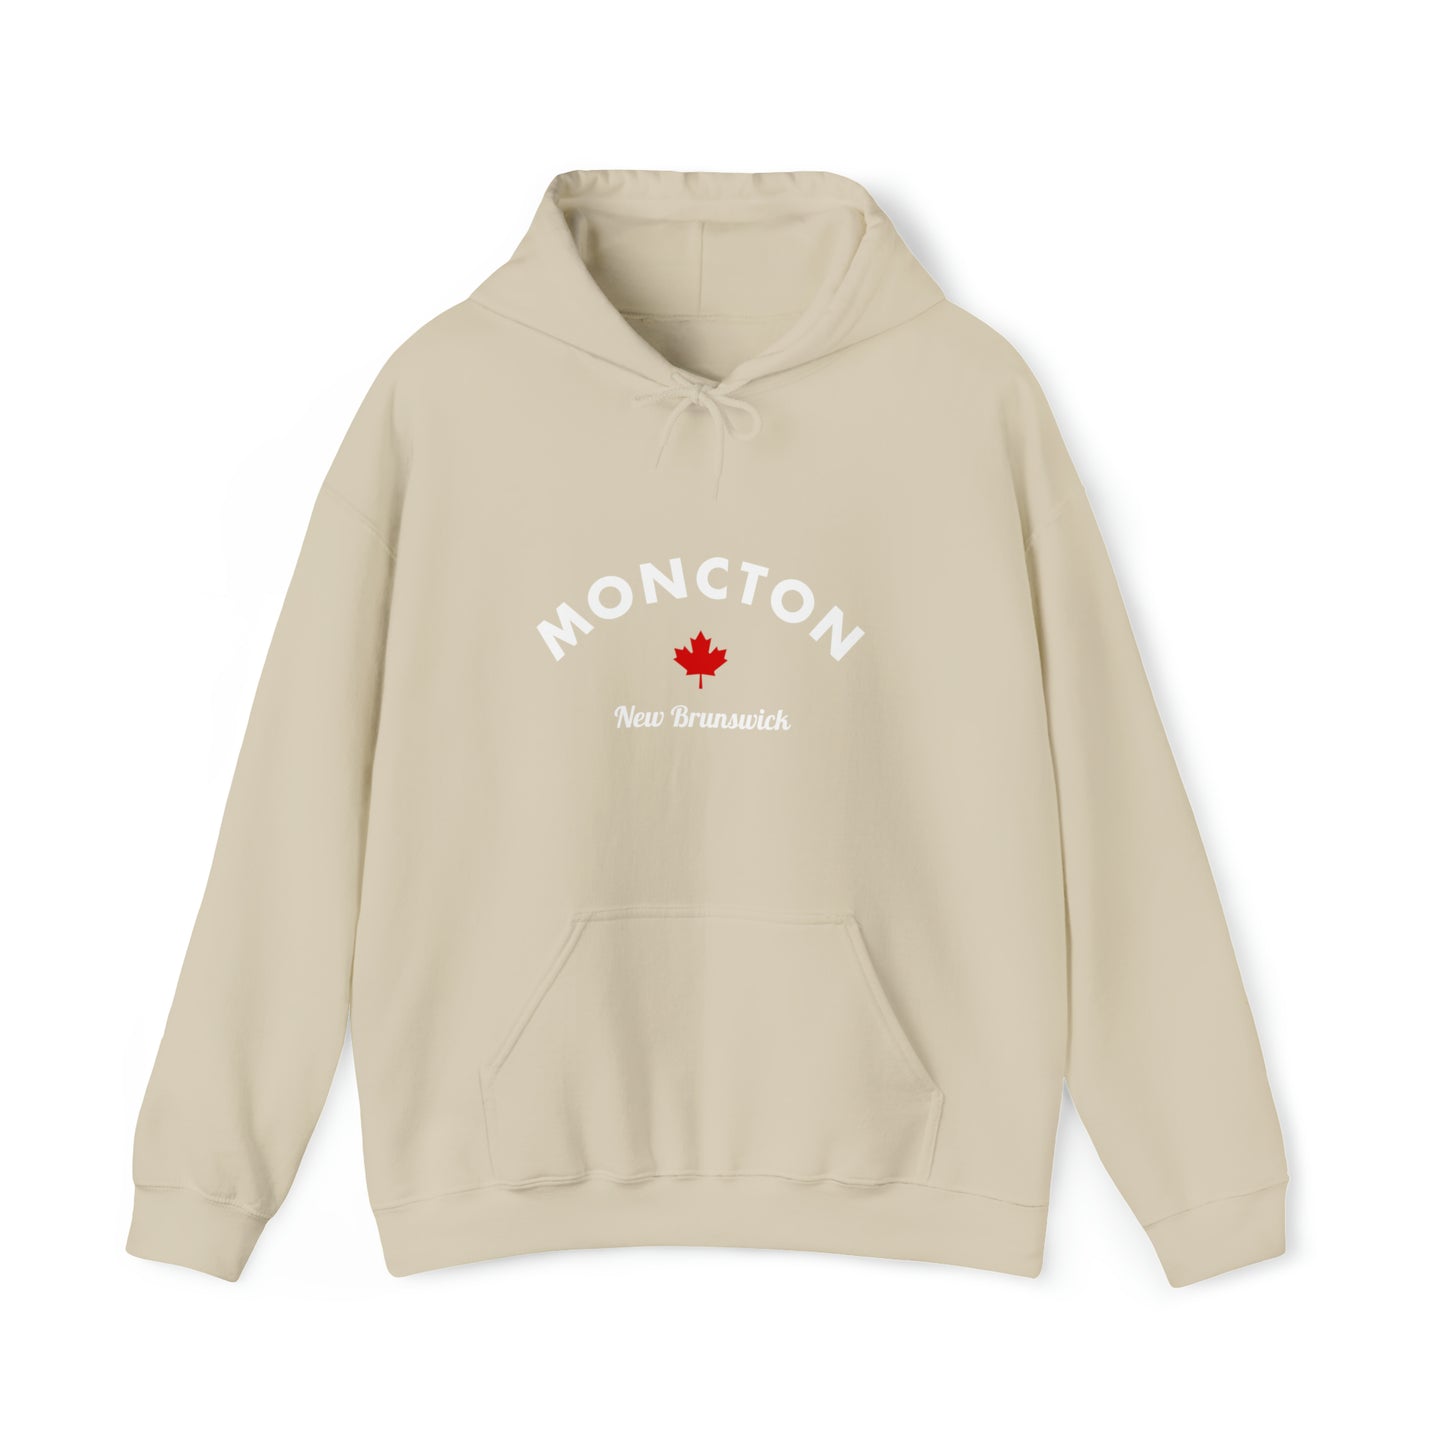 S Sand Moncton Hoodie from HoodySZN.com